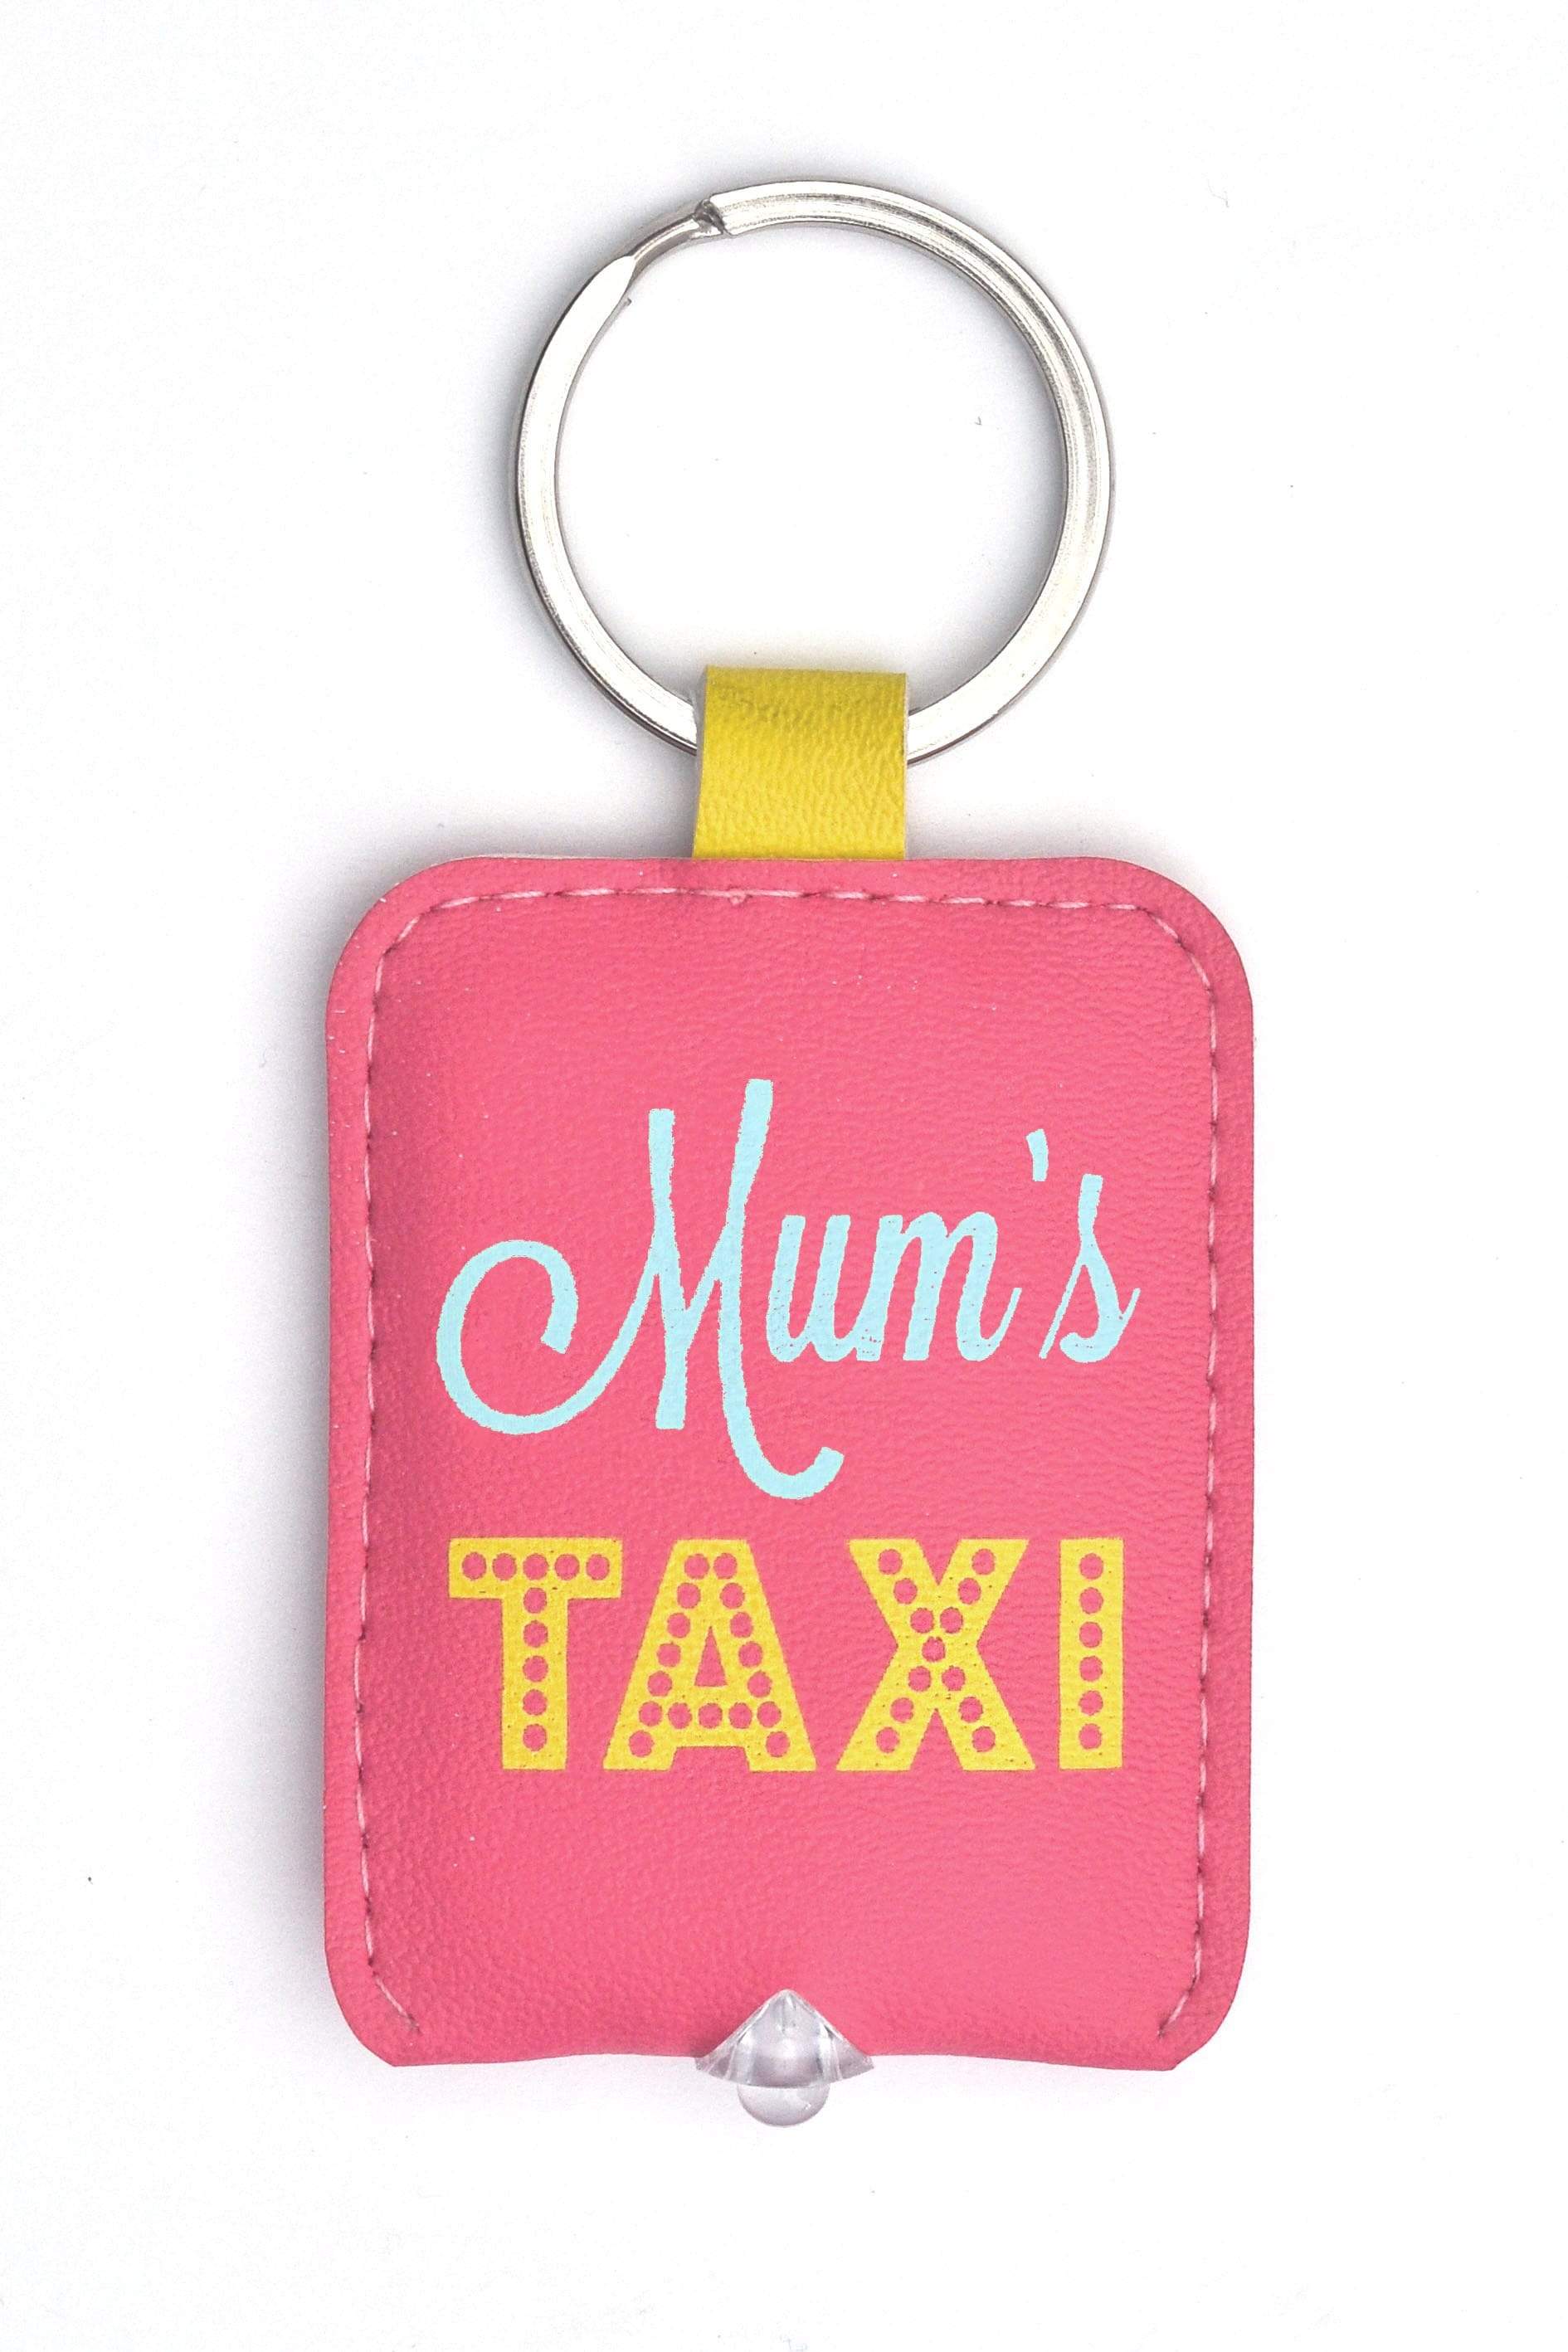 Curios Gifts Keyring Slogans Keylight - Keyring with Built-in LED Torch - Mums Taxi